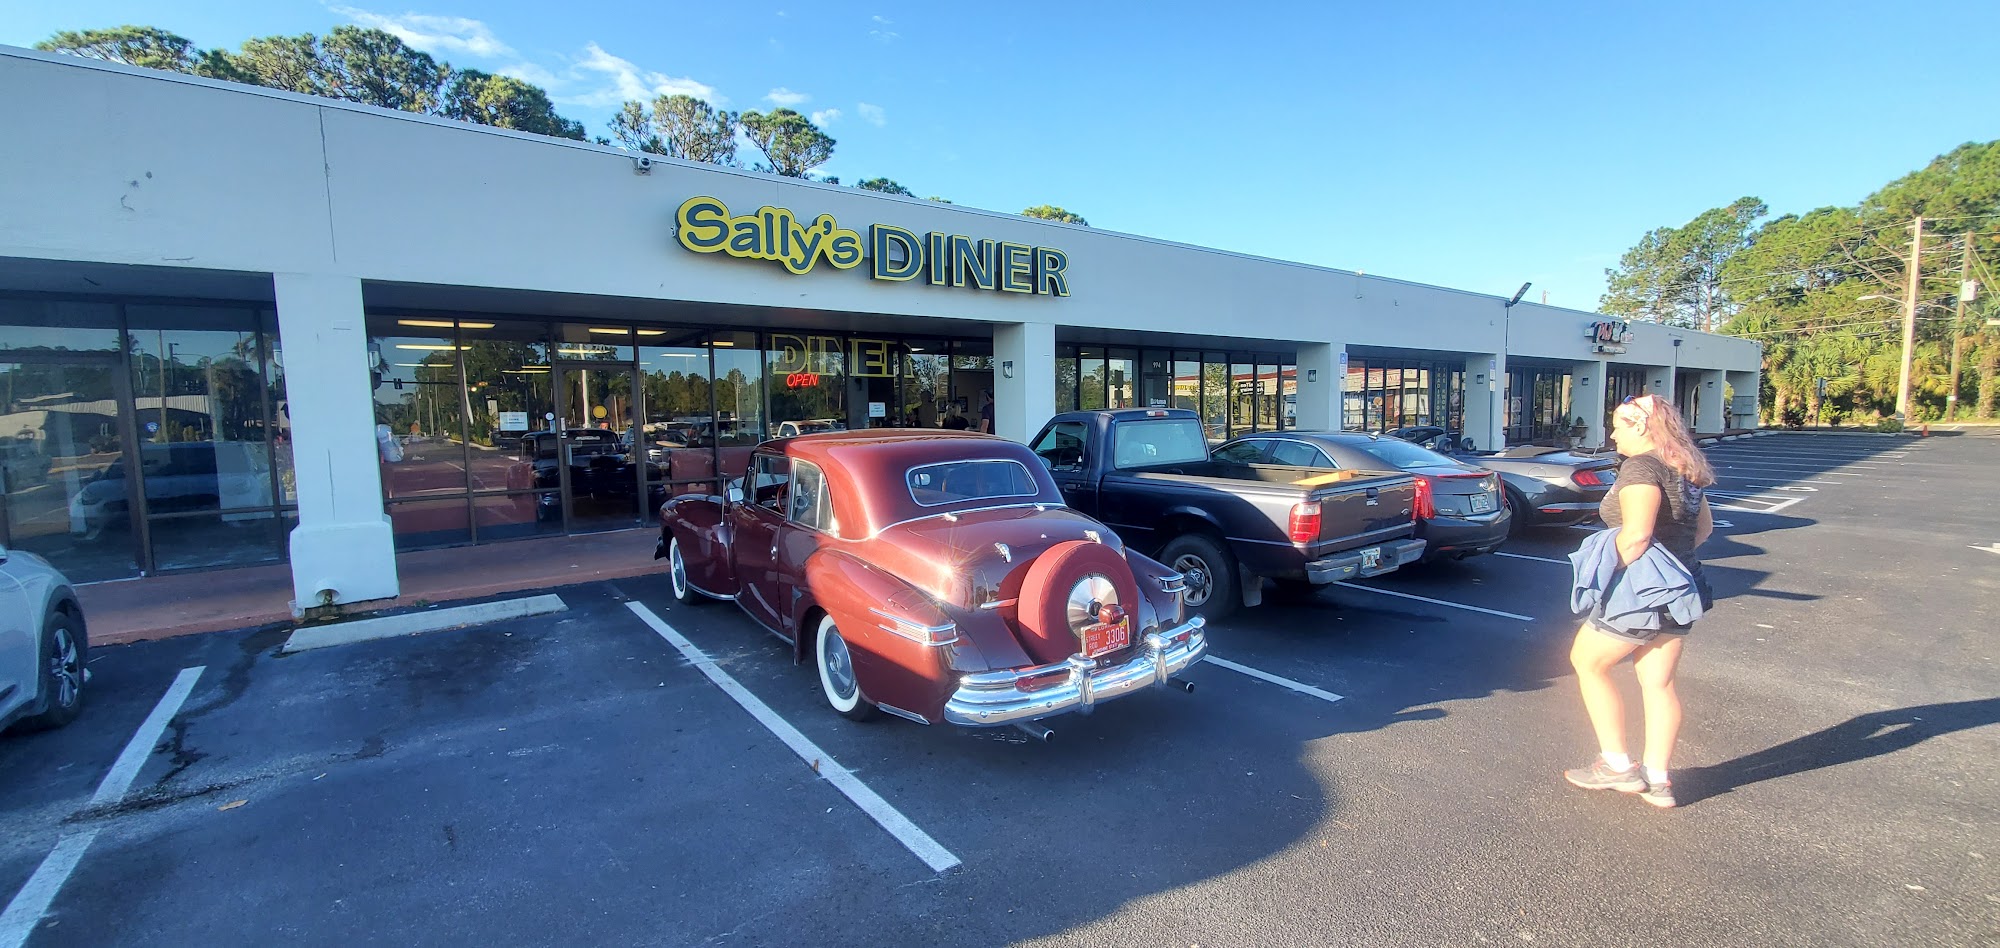 Sally's Diner 972 W State Rd 434, Longwood, FL 32750